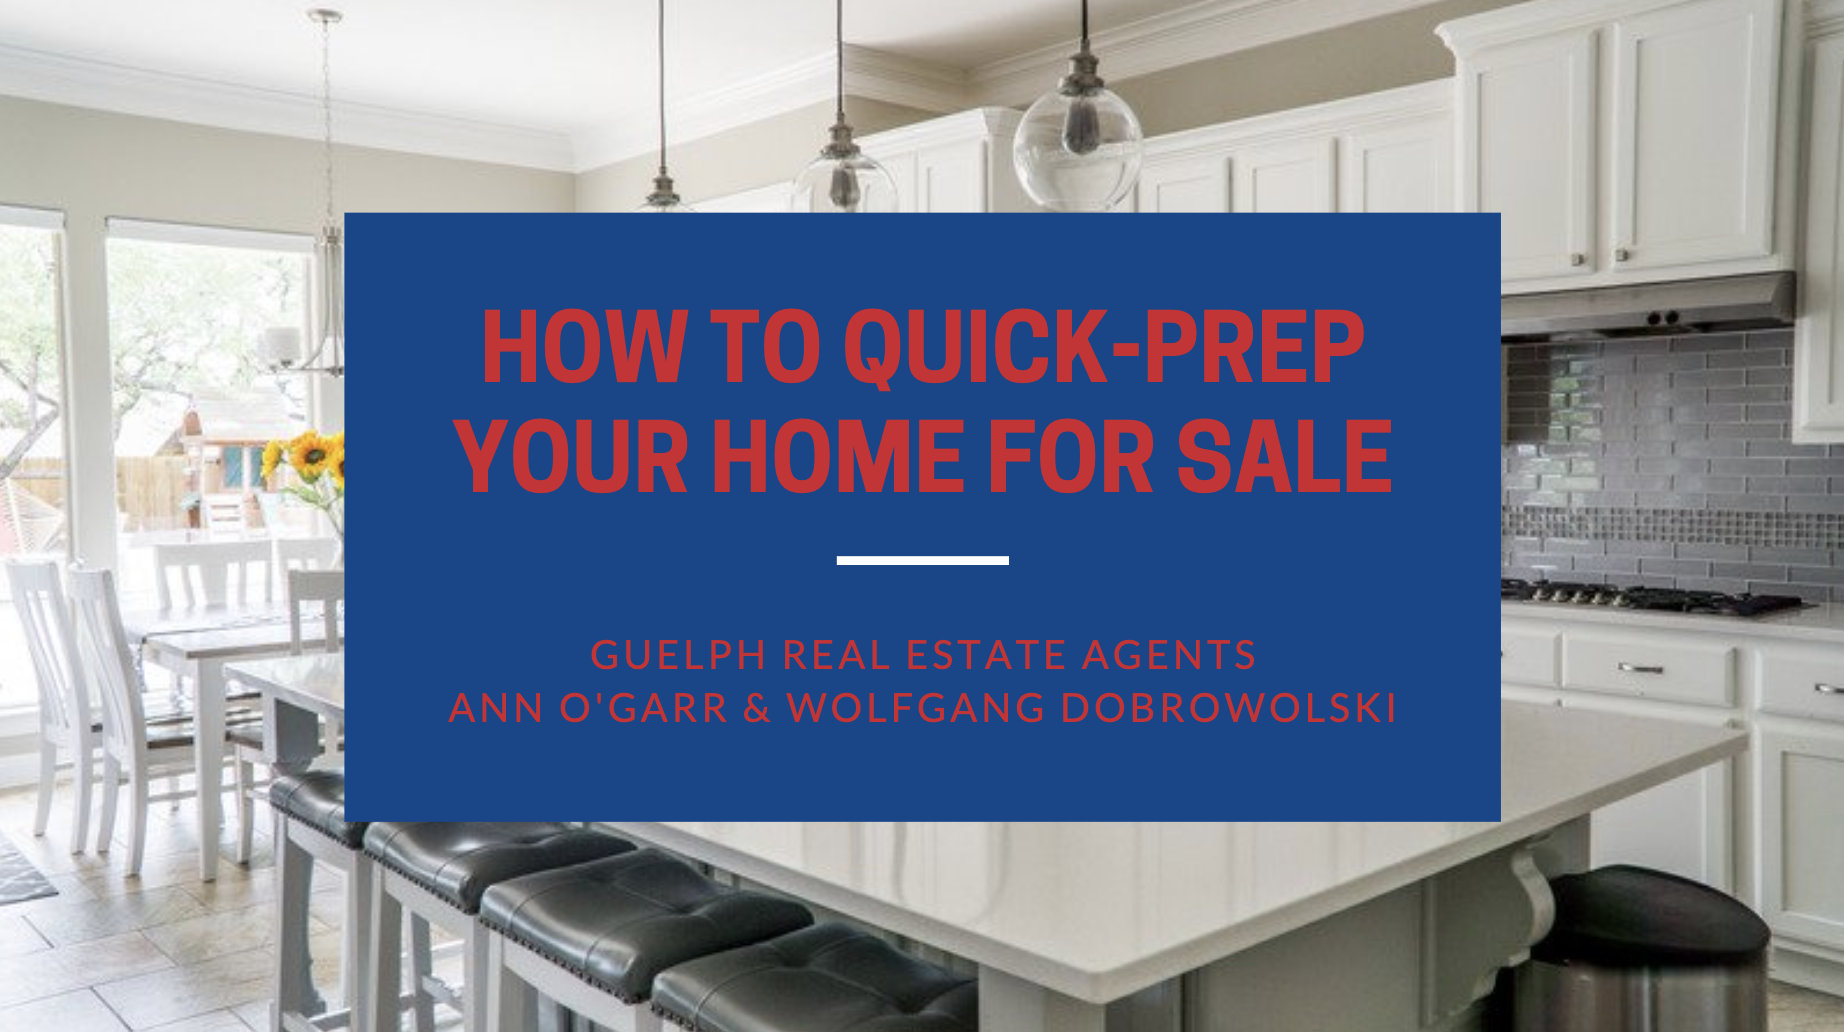 Guelph Real Estate Agents - How to Quick Prep Your Home for Sale